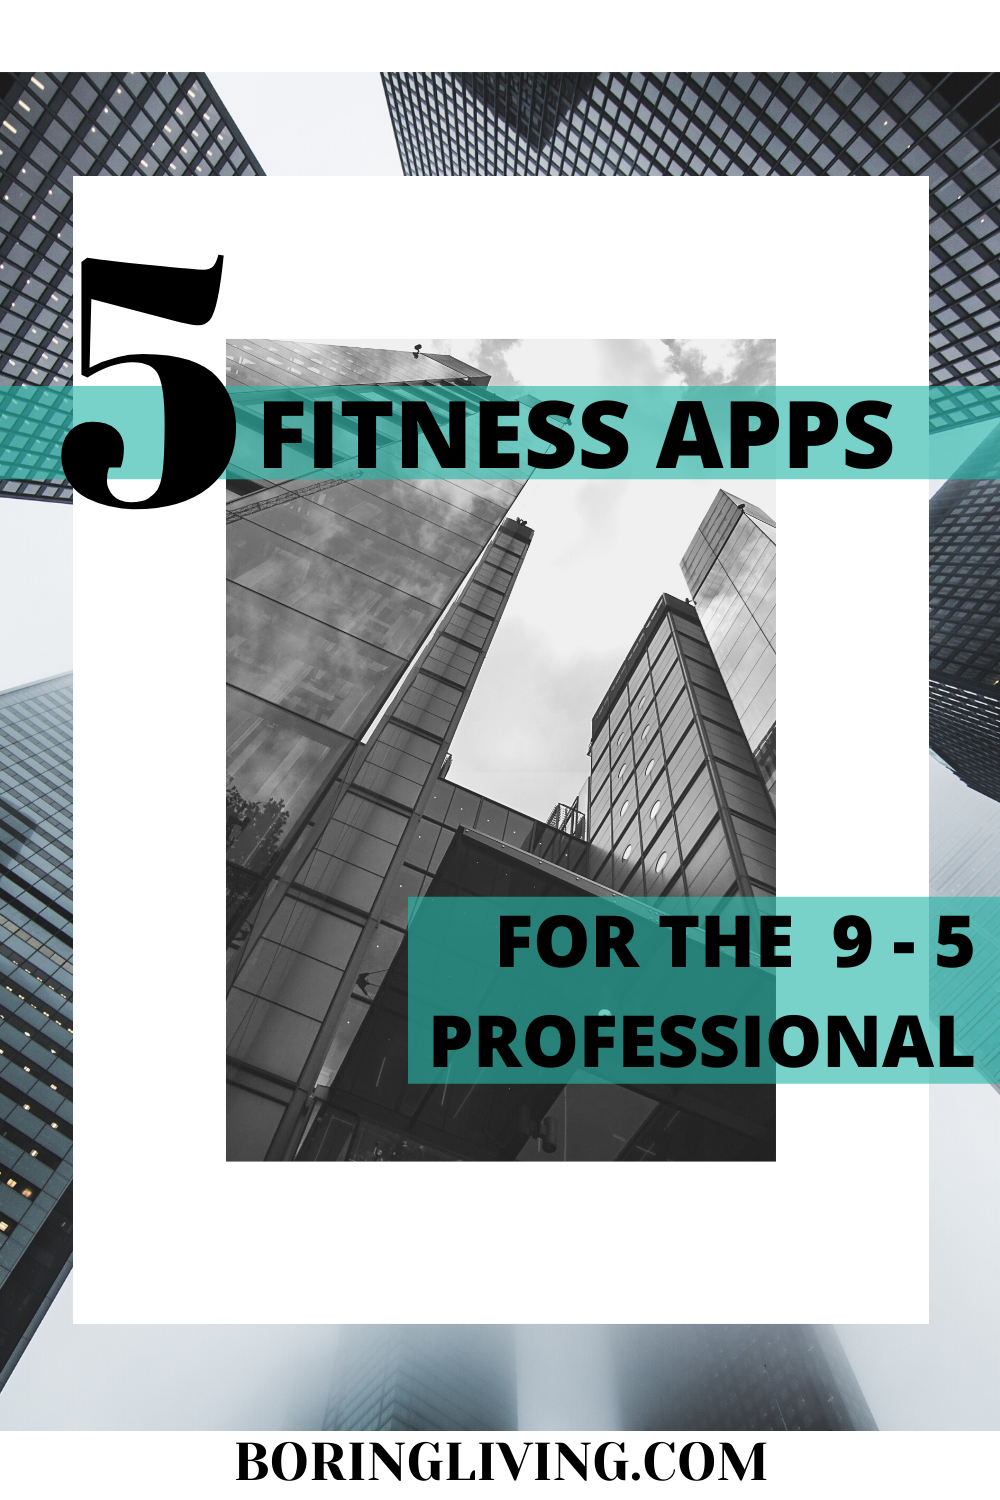 5 Fitness Apps That Every 9-5 Worker Should Have